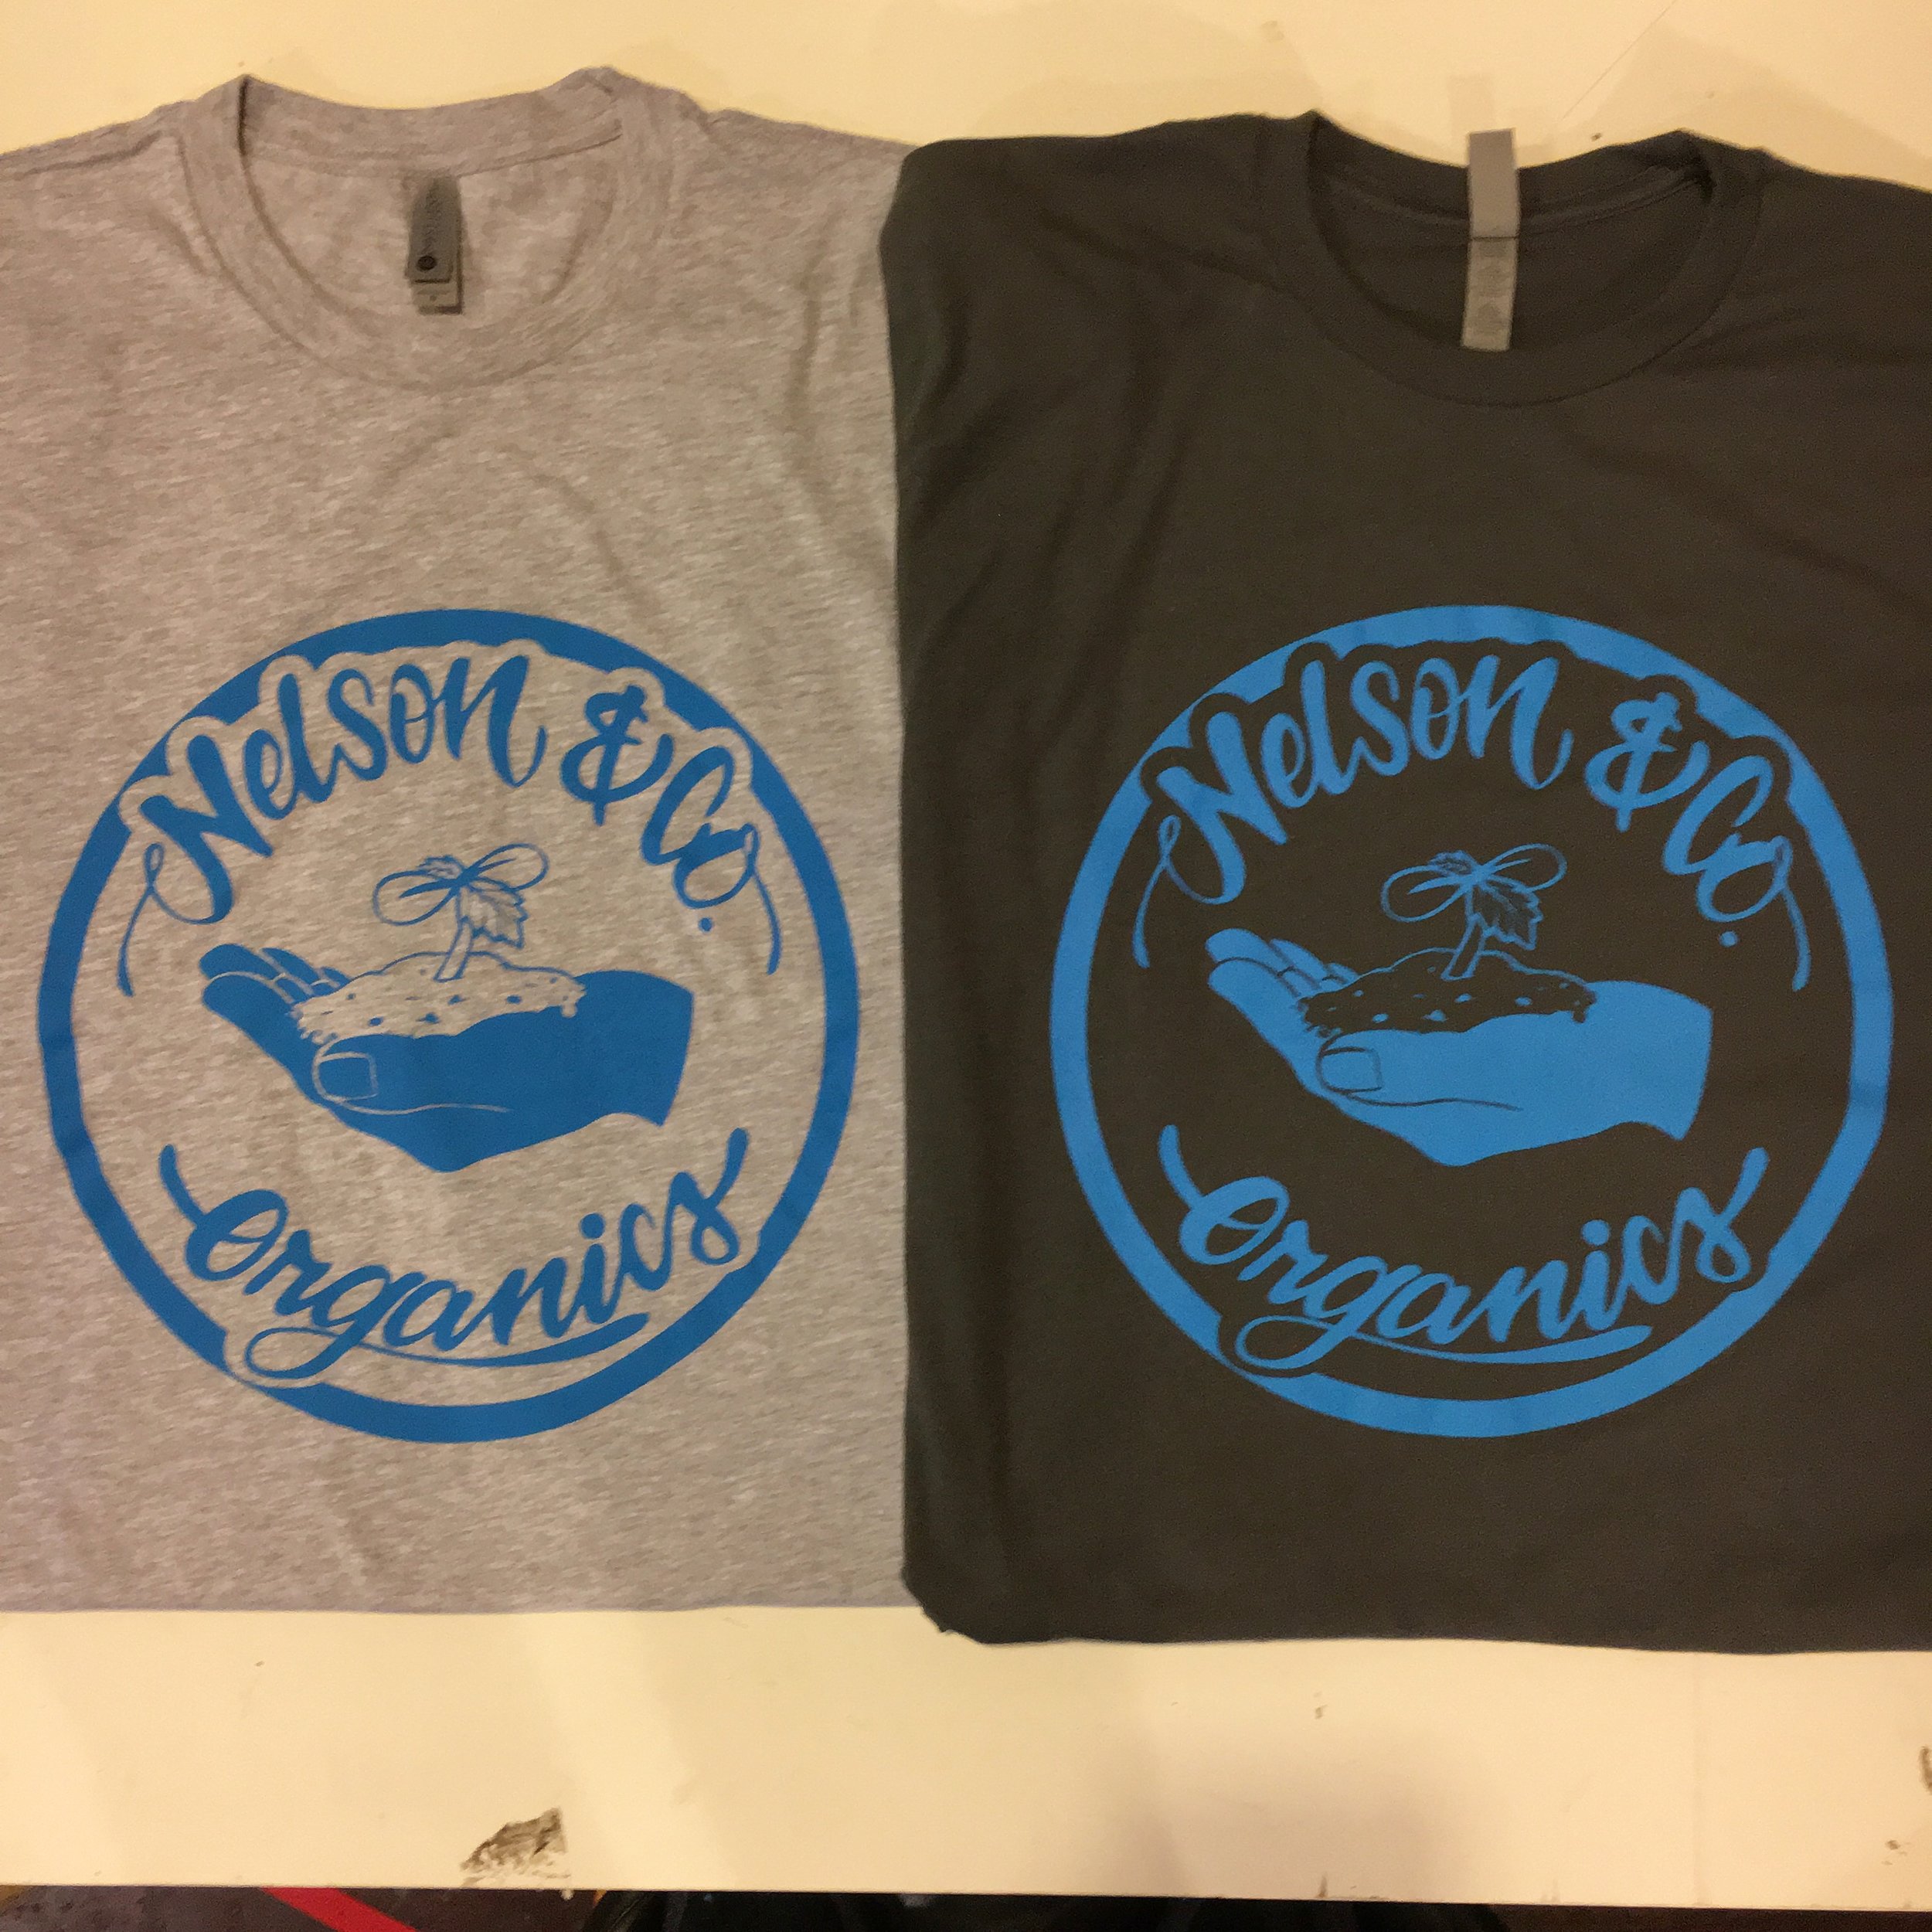  1 color print for Nelson &amp; Co. Organics from Portland, OR 